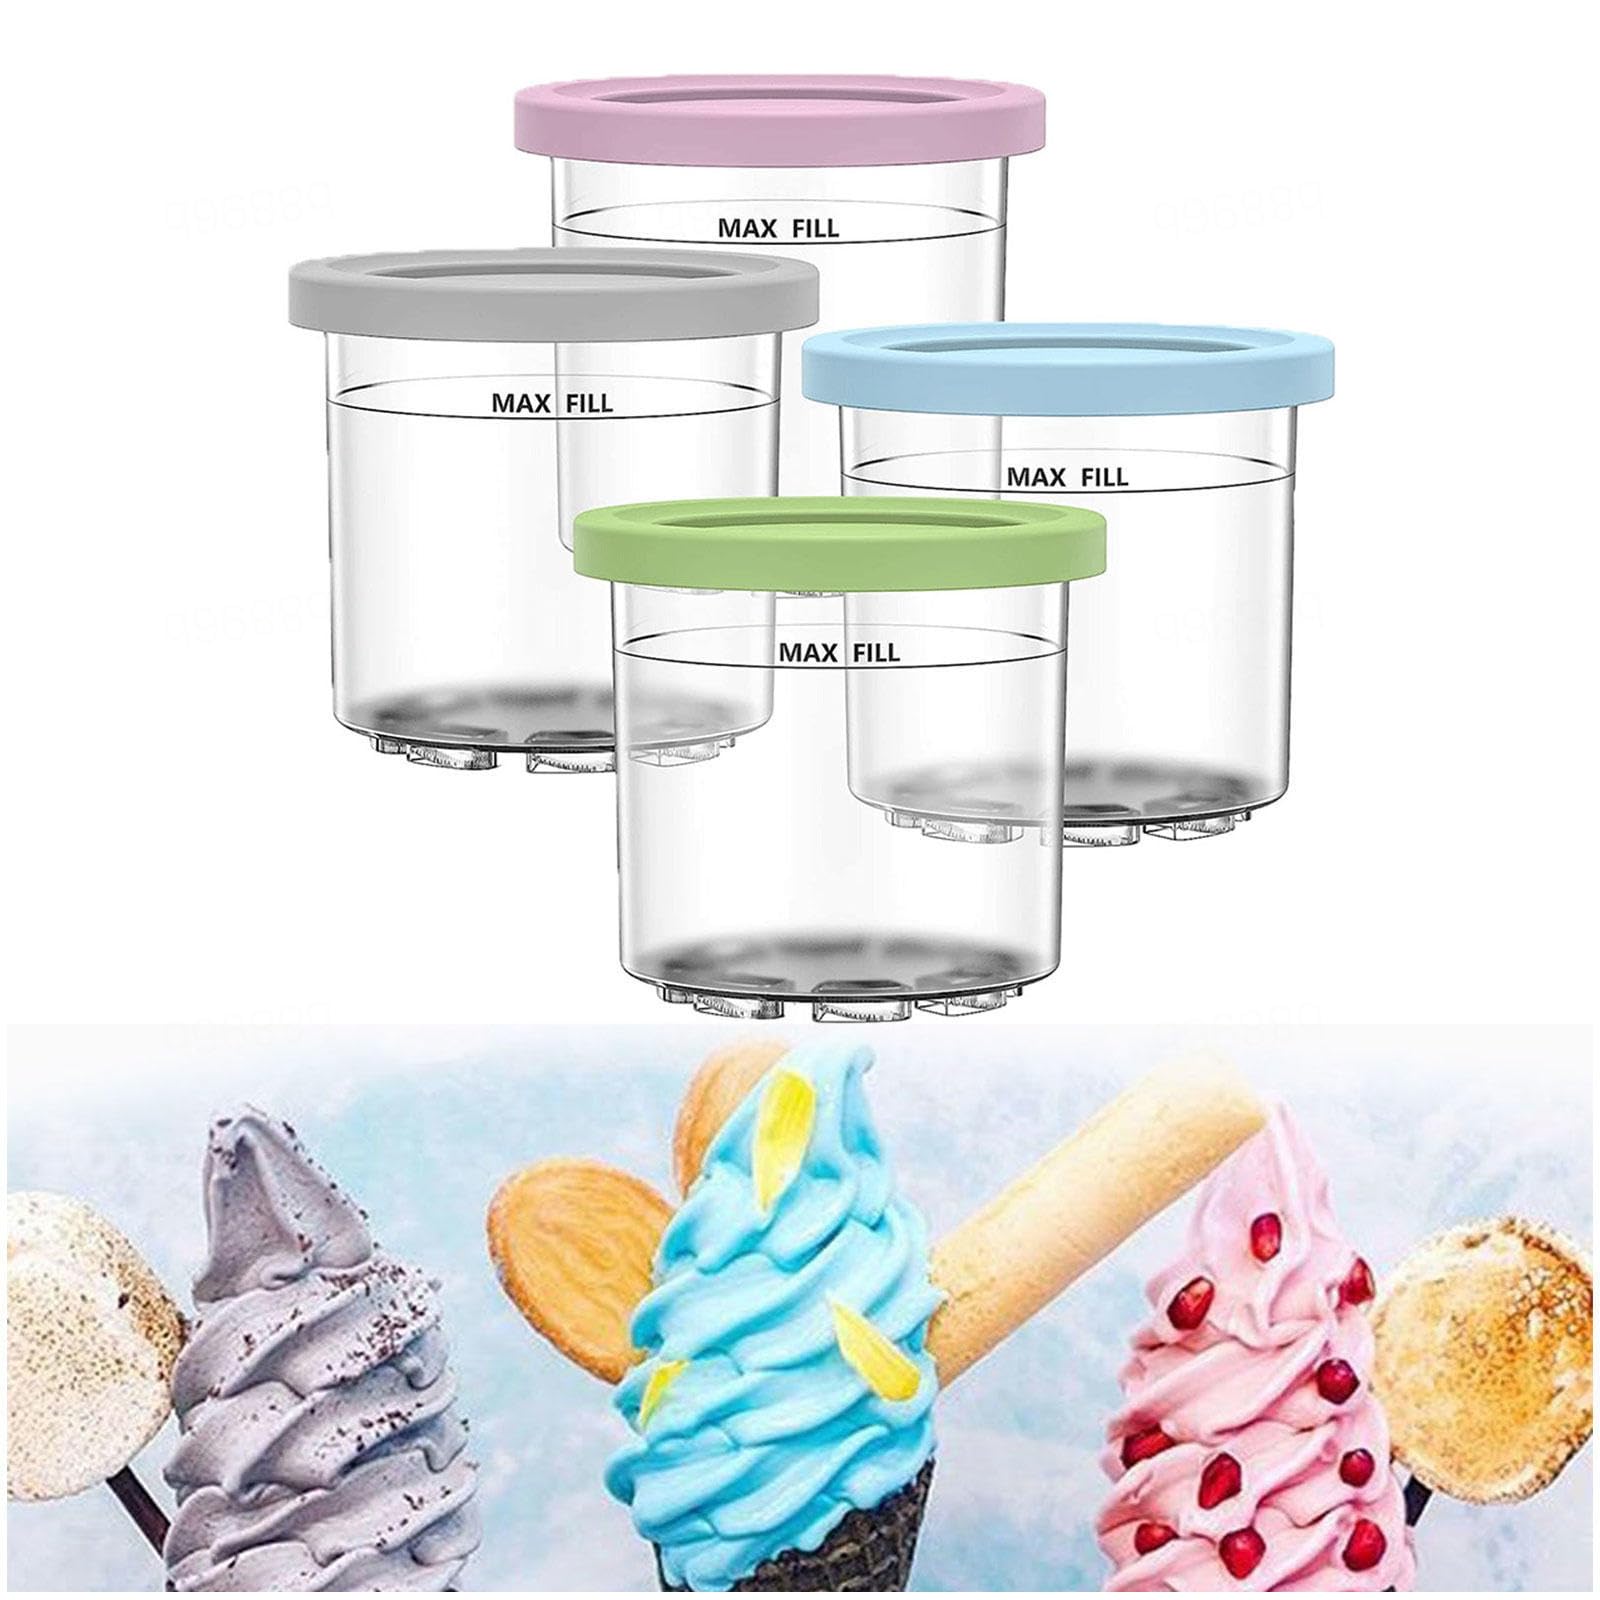 Creami Deluxe Pints, for Ninja Creami Deluxe Containers,16 OZ Creami Deluxe Pints Safe and Leak Proof for NC301 NC300 NC299AM Series Ice Cream Maker